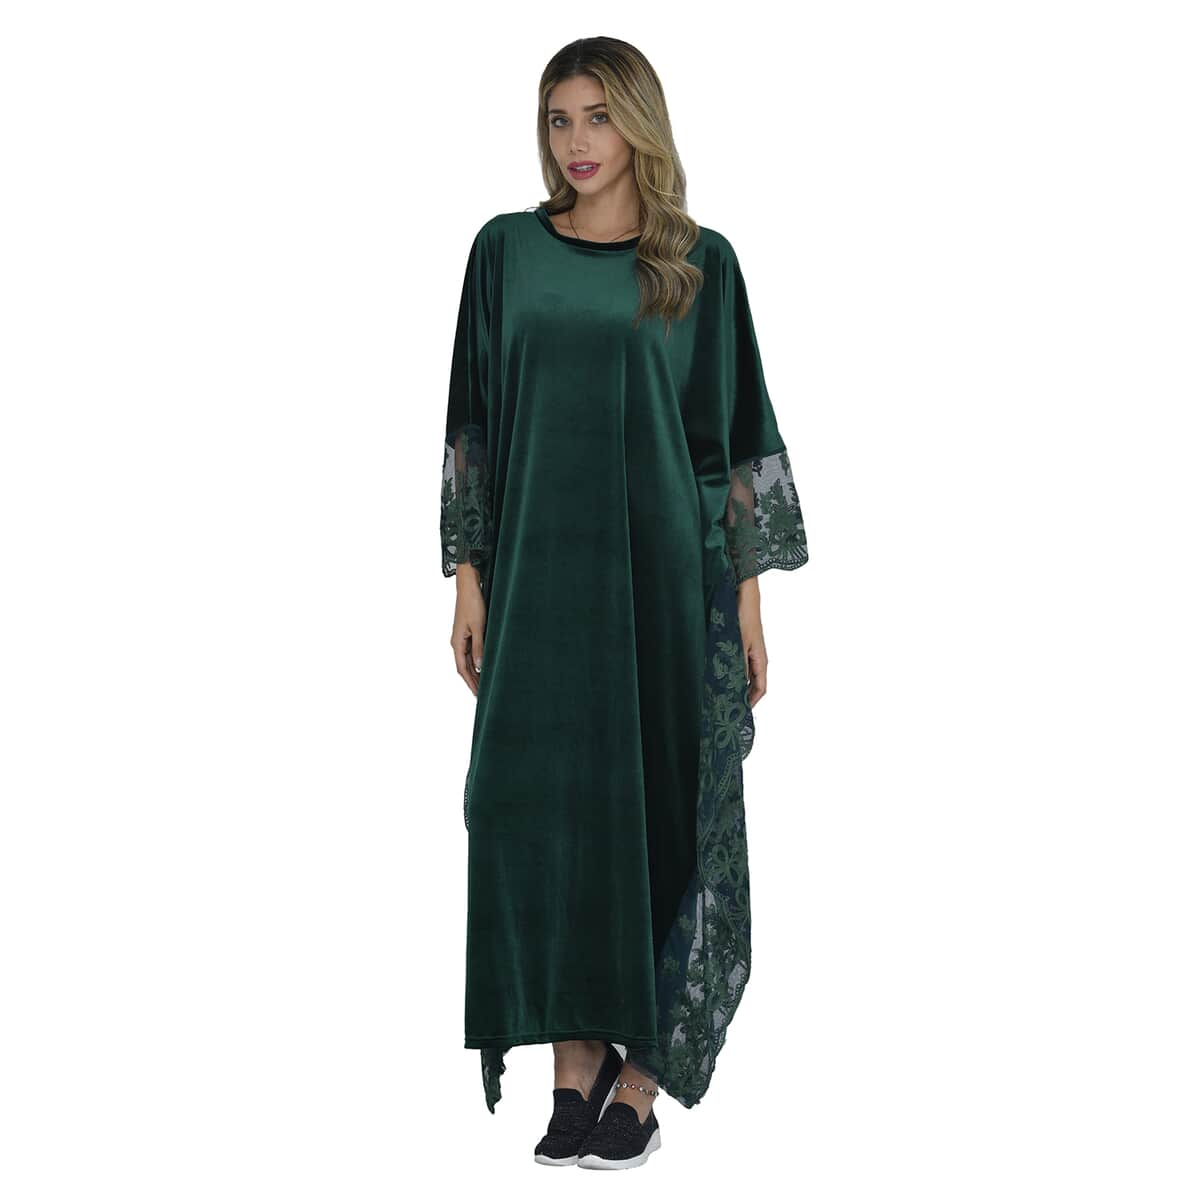 Tamsy Black Label - Lux Stretch Velvet Kaftan with Lace in Emerald Green - One Size Fits Most image number 3